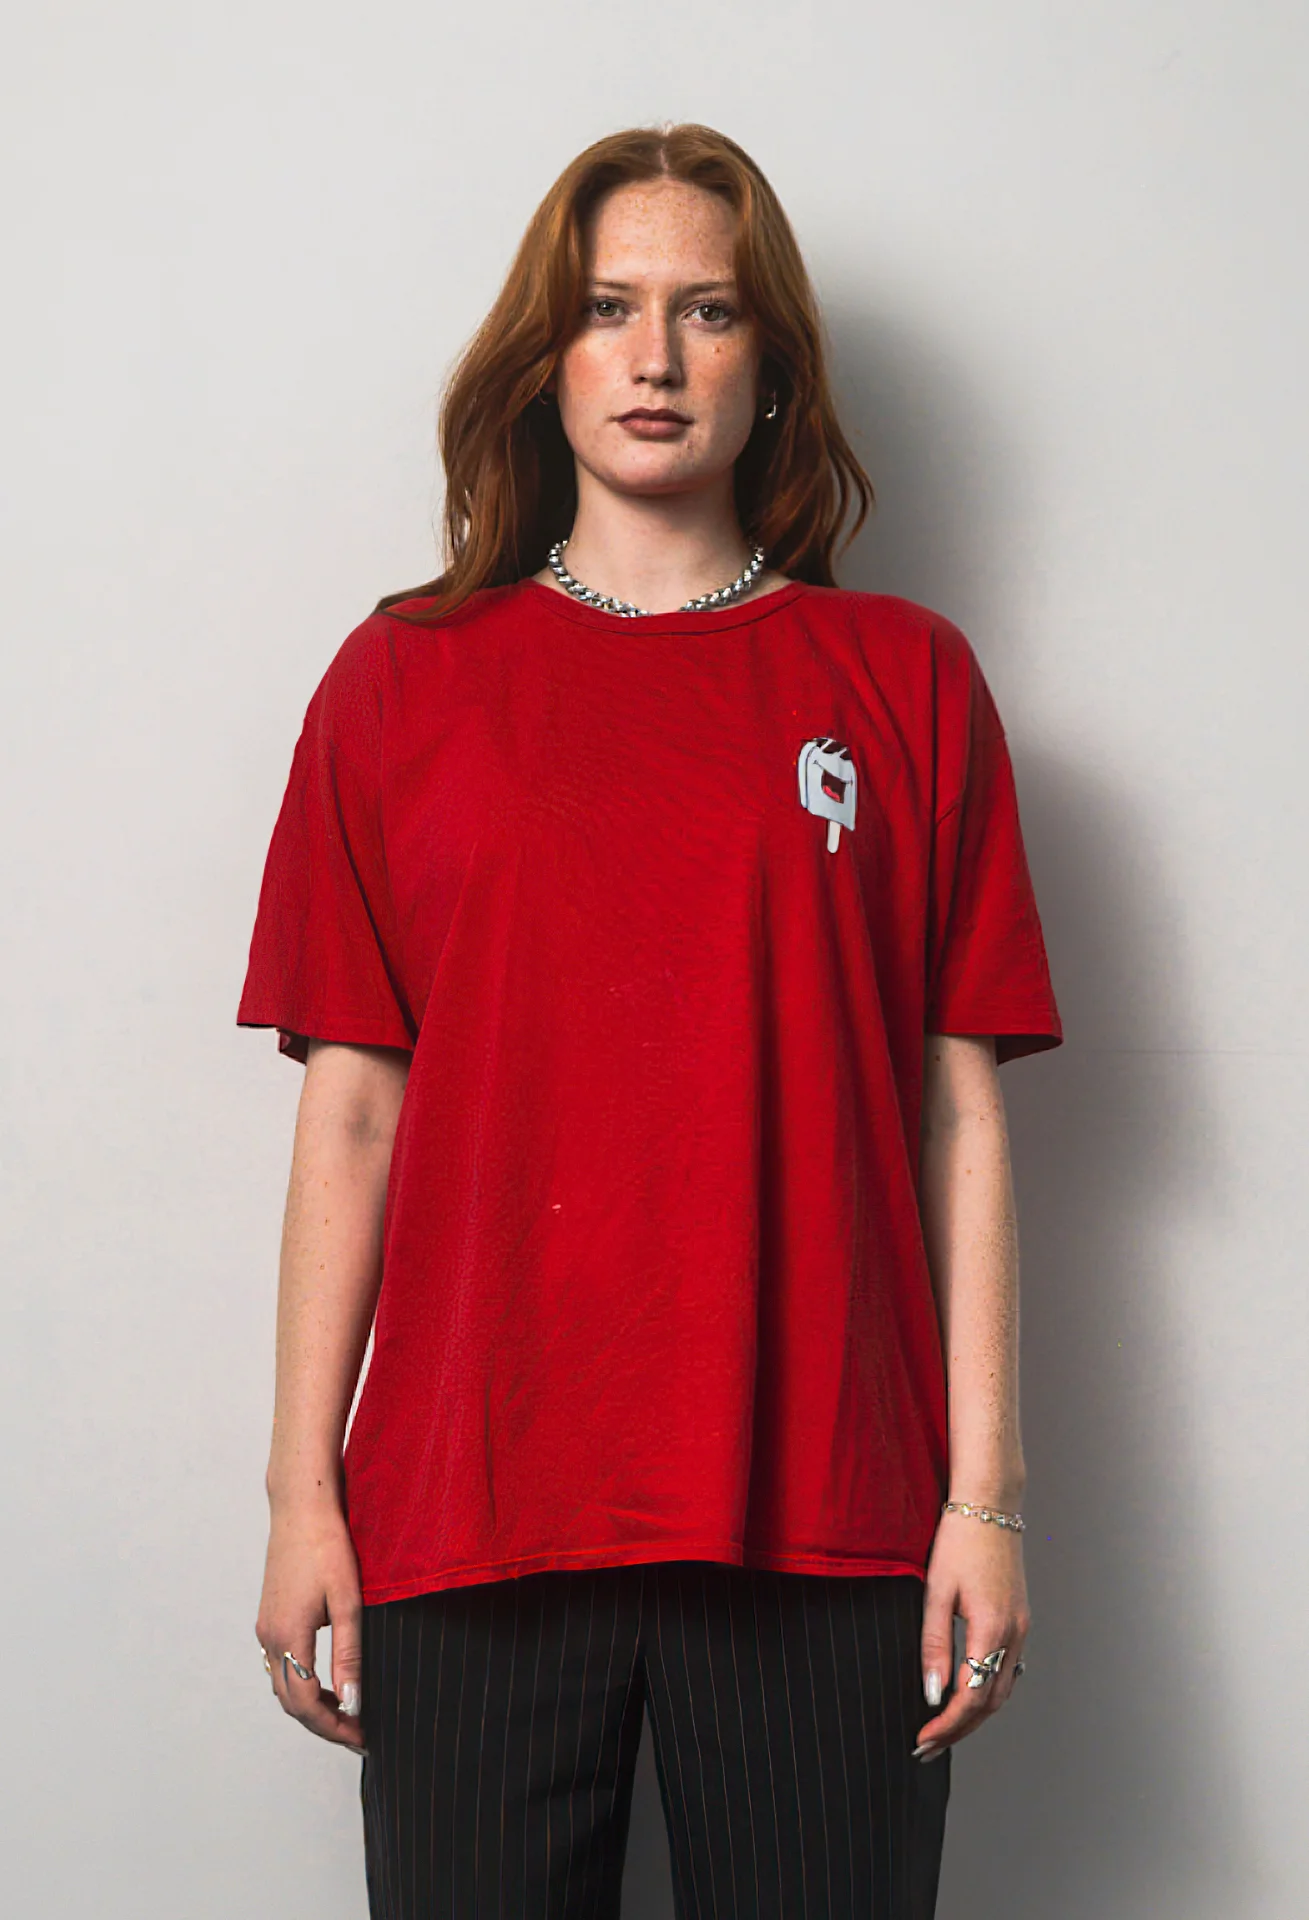 OKYO - Red Tee with print (L)